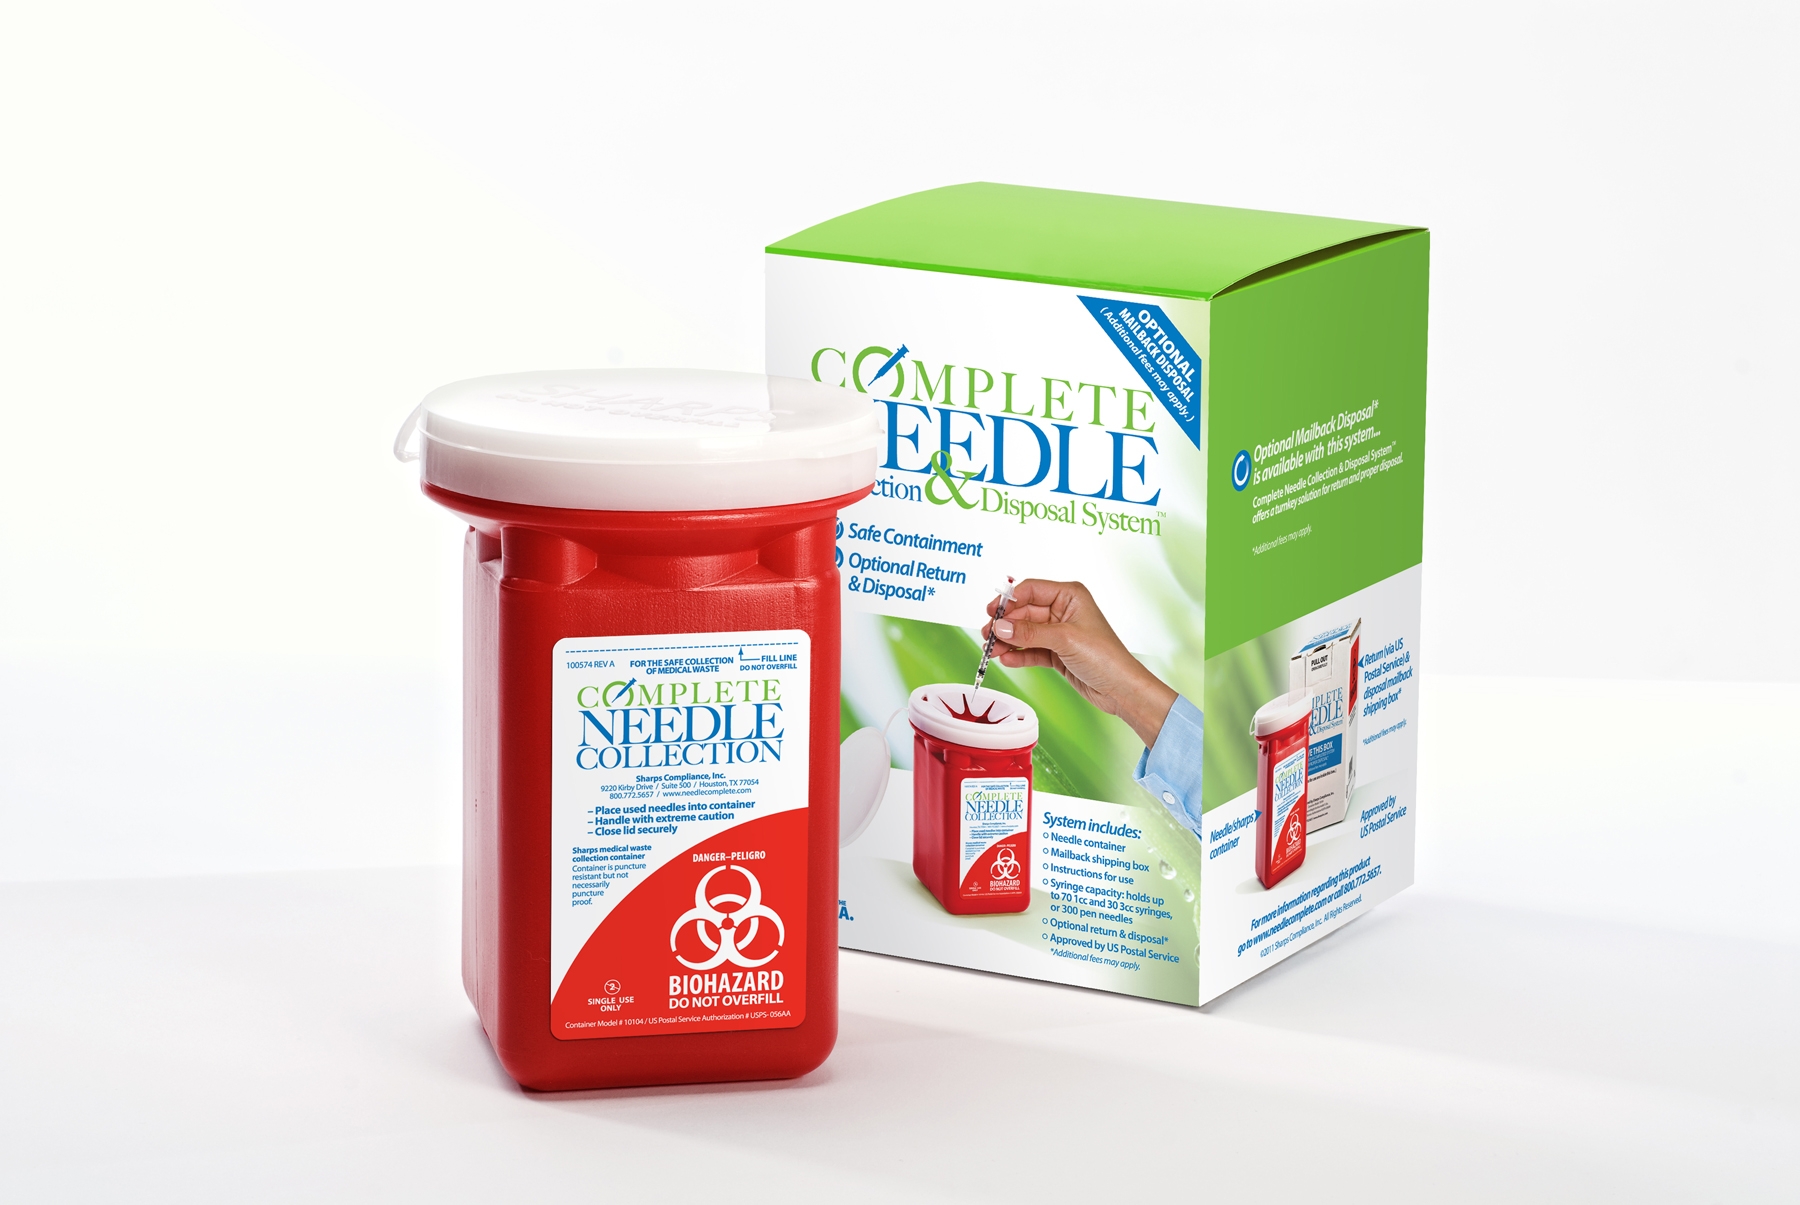 Complete Needle Collection & Disposal System(TM)